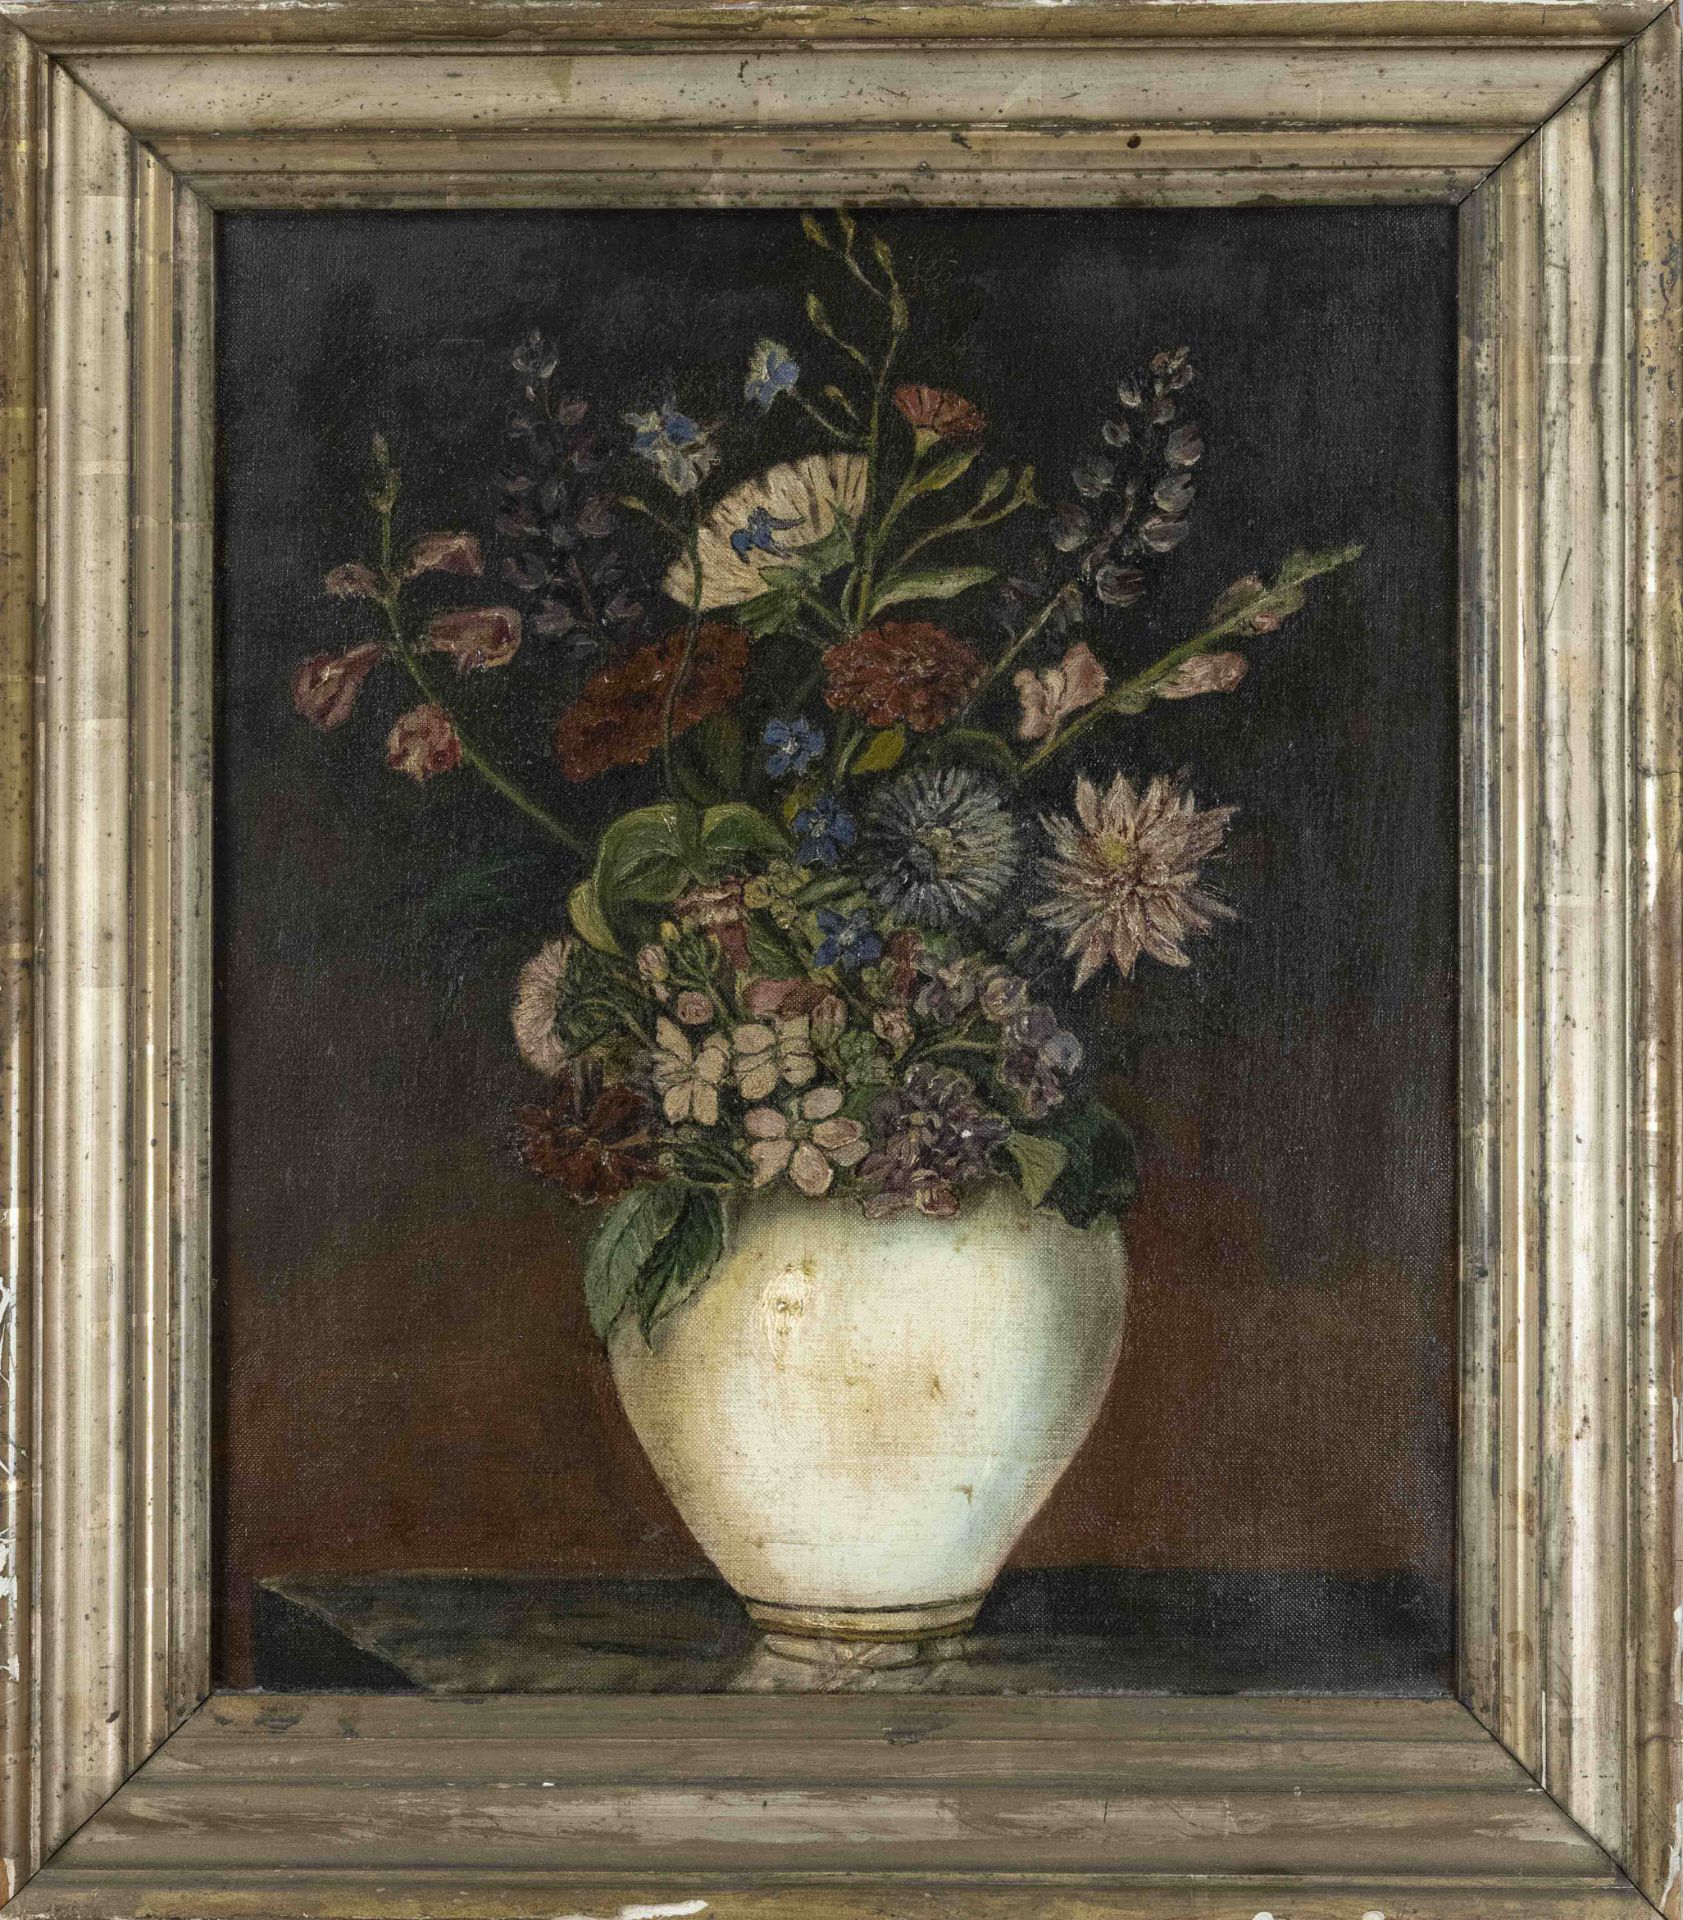 Anonymous painter around 1900, Still life of flowers in a white vase, oil on canvas, unsigned, 52